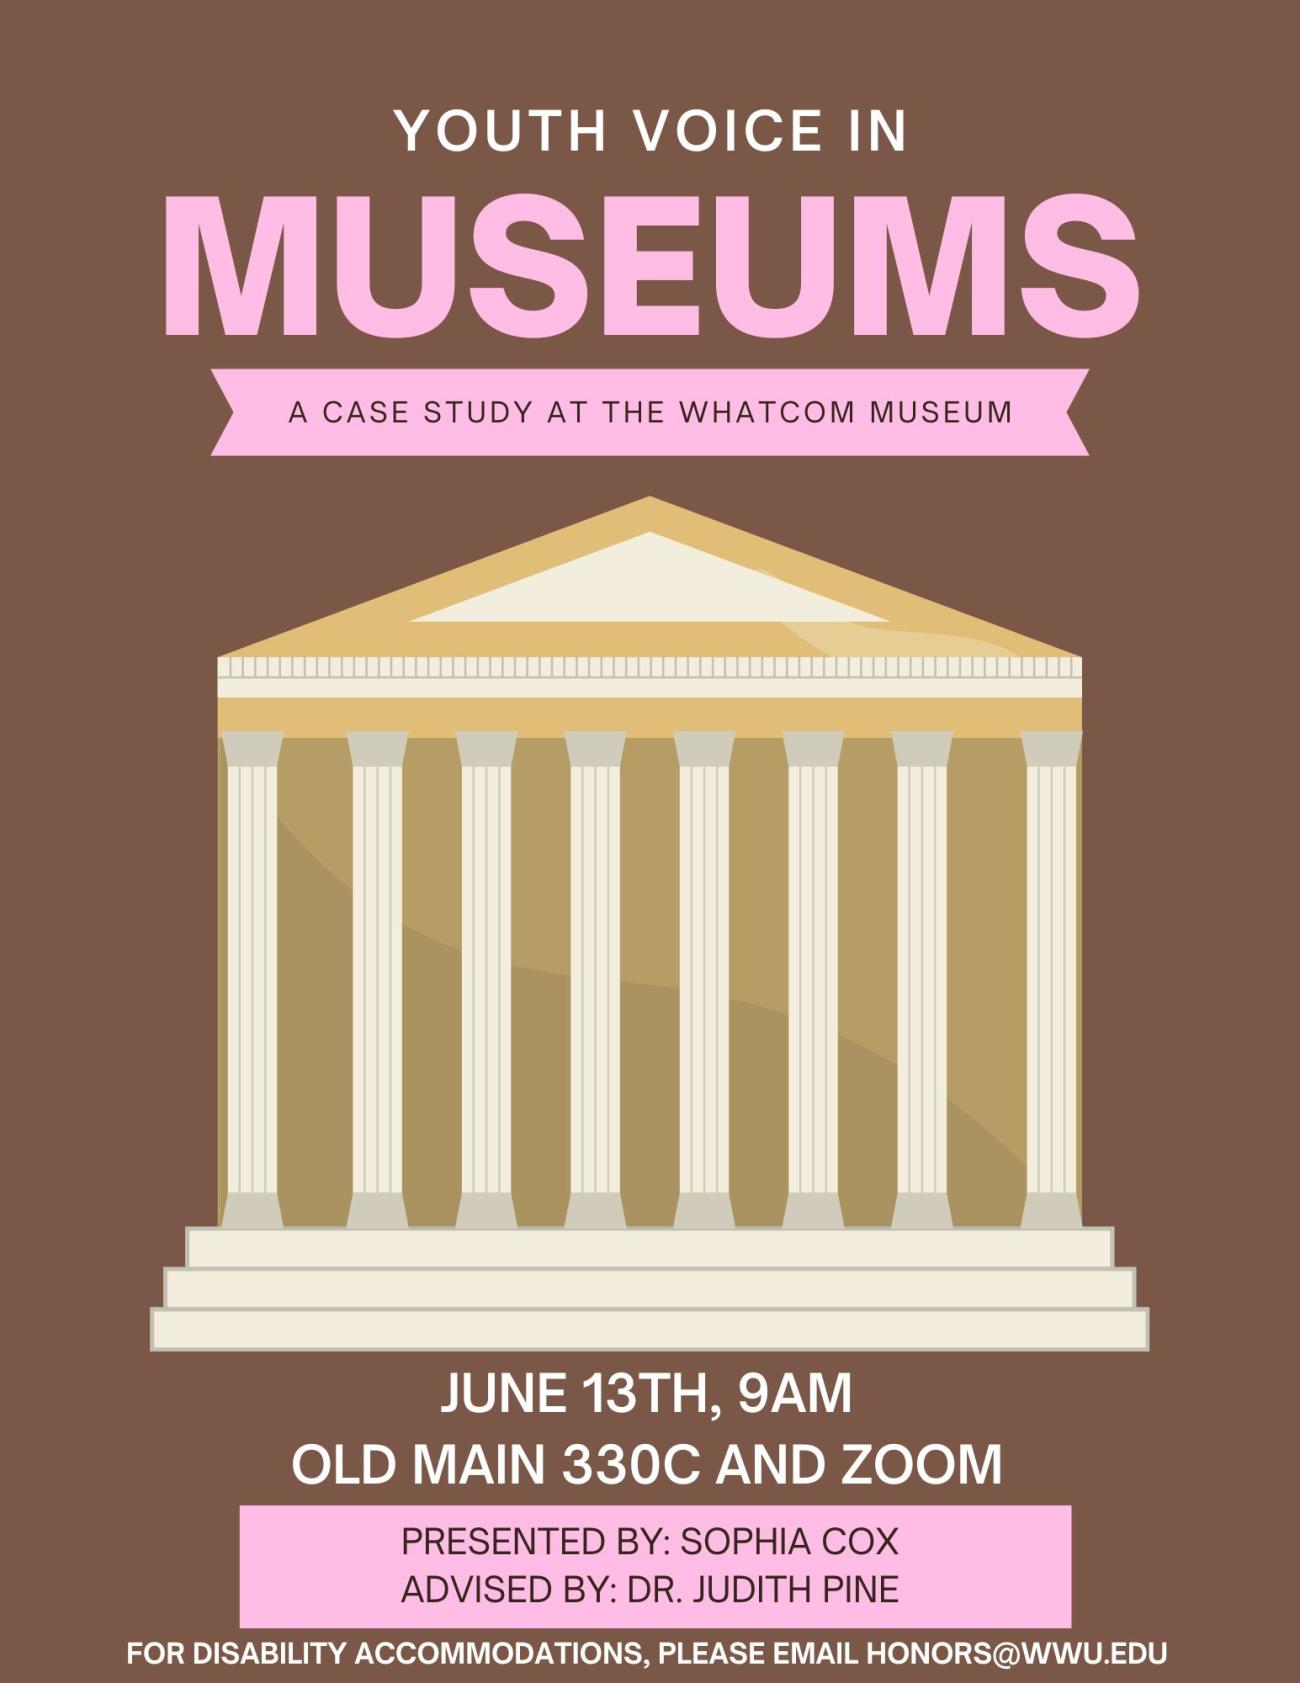 A brown background with the words "Youth Voice in Museums: A Case Study at the Whatcom Museum" written in pink. Below, a decal of a traditional style museum building. Below, the words "June 13th, 9am; Old Main 330C and Zoom; Presented by: Sophia Cox; Advised by: Dr. Judith Pine; For Disability Accommodations, please email honors@wwu.edu".